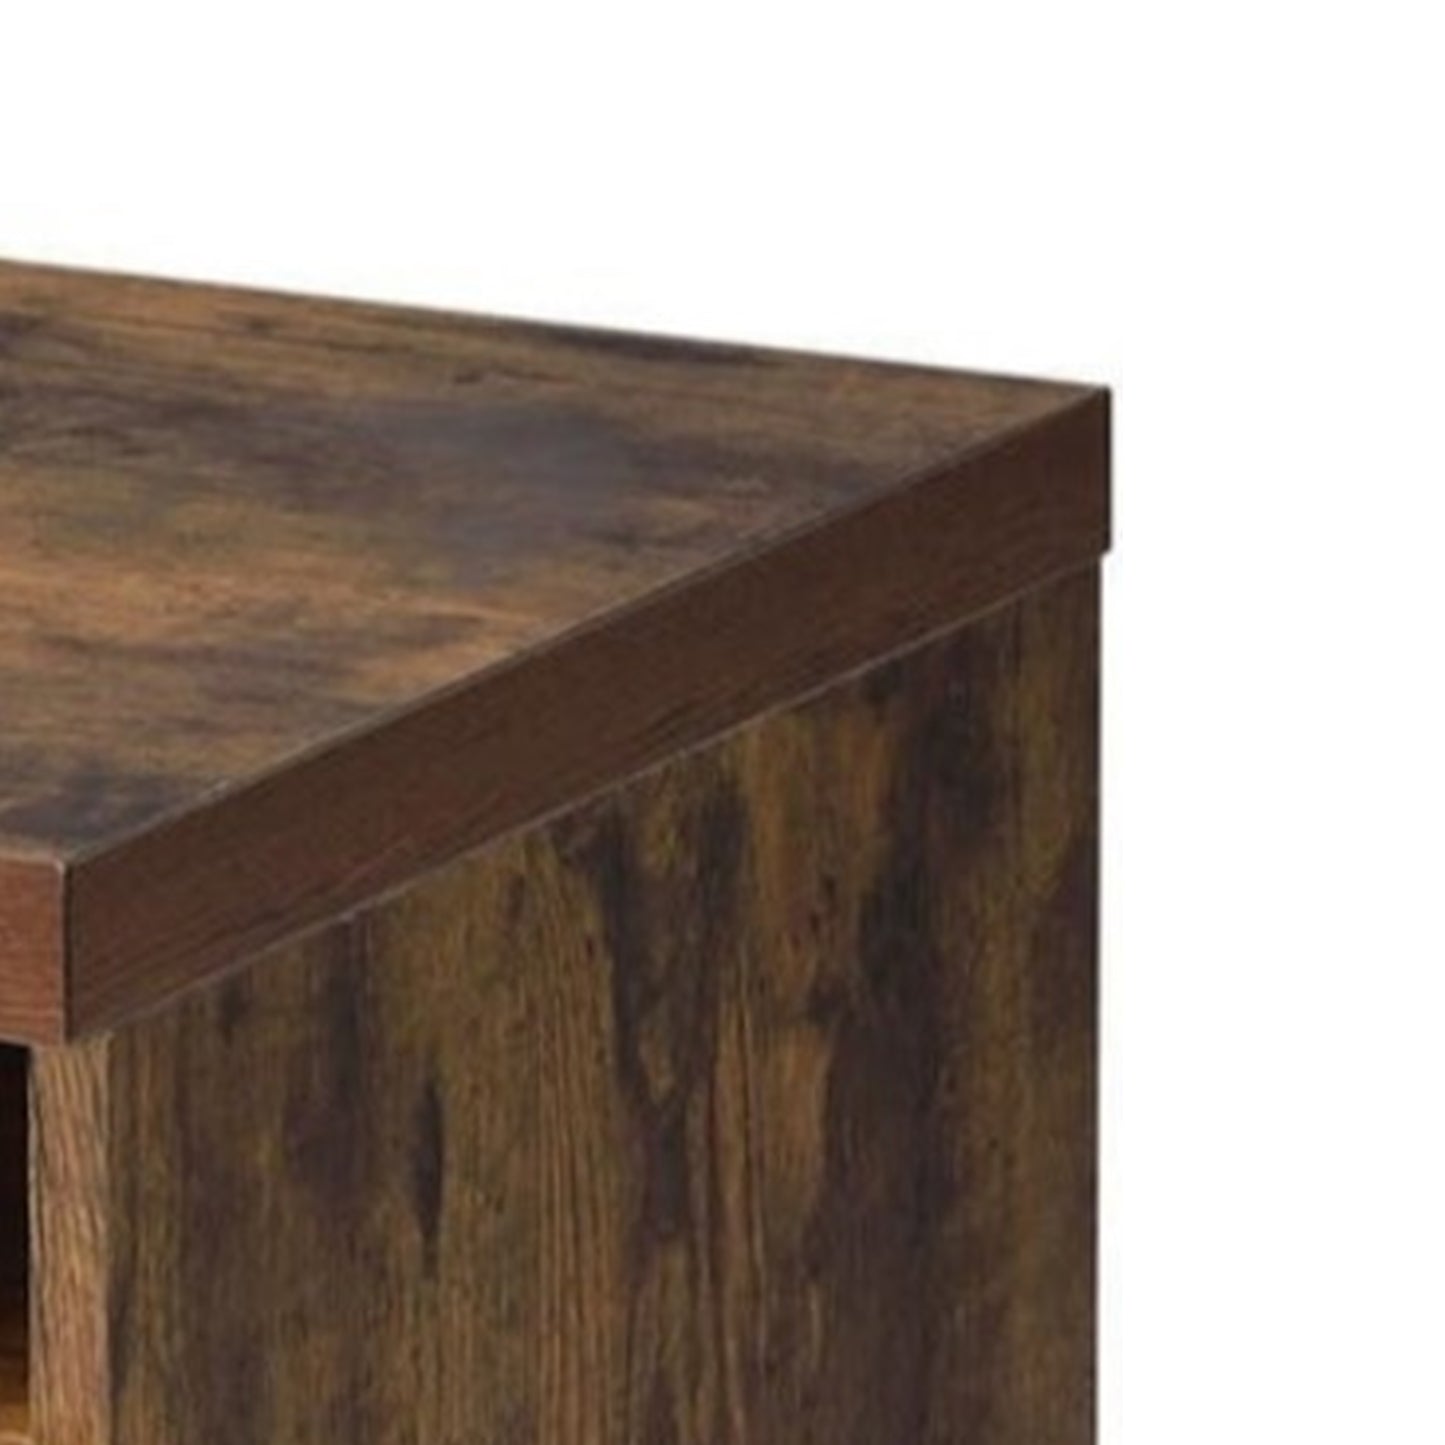 Wooden File Cabinet With Open Compartment And Drawer, Oak Brown And Black By Benzara